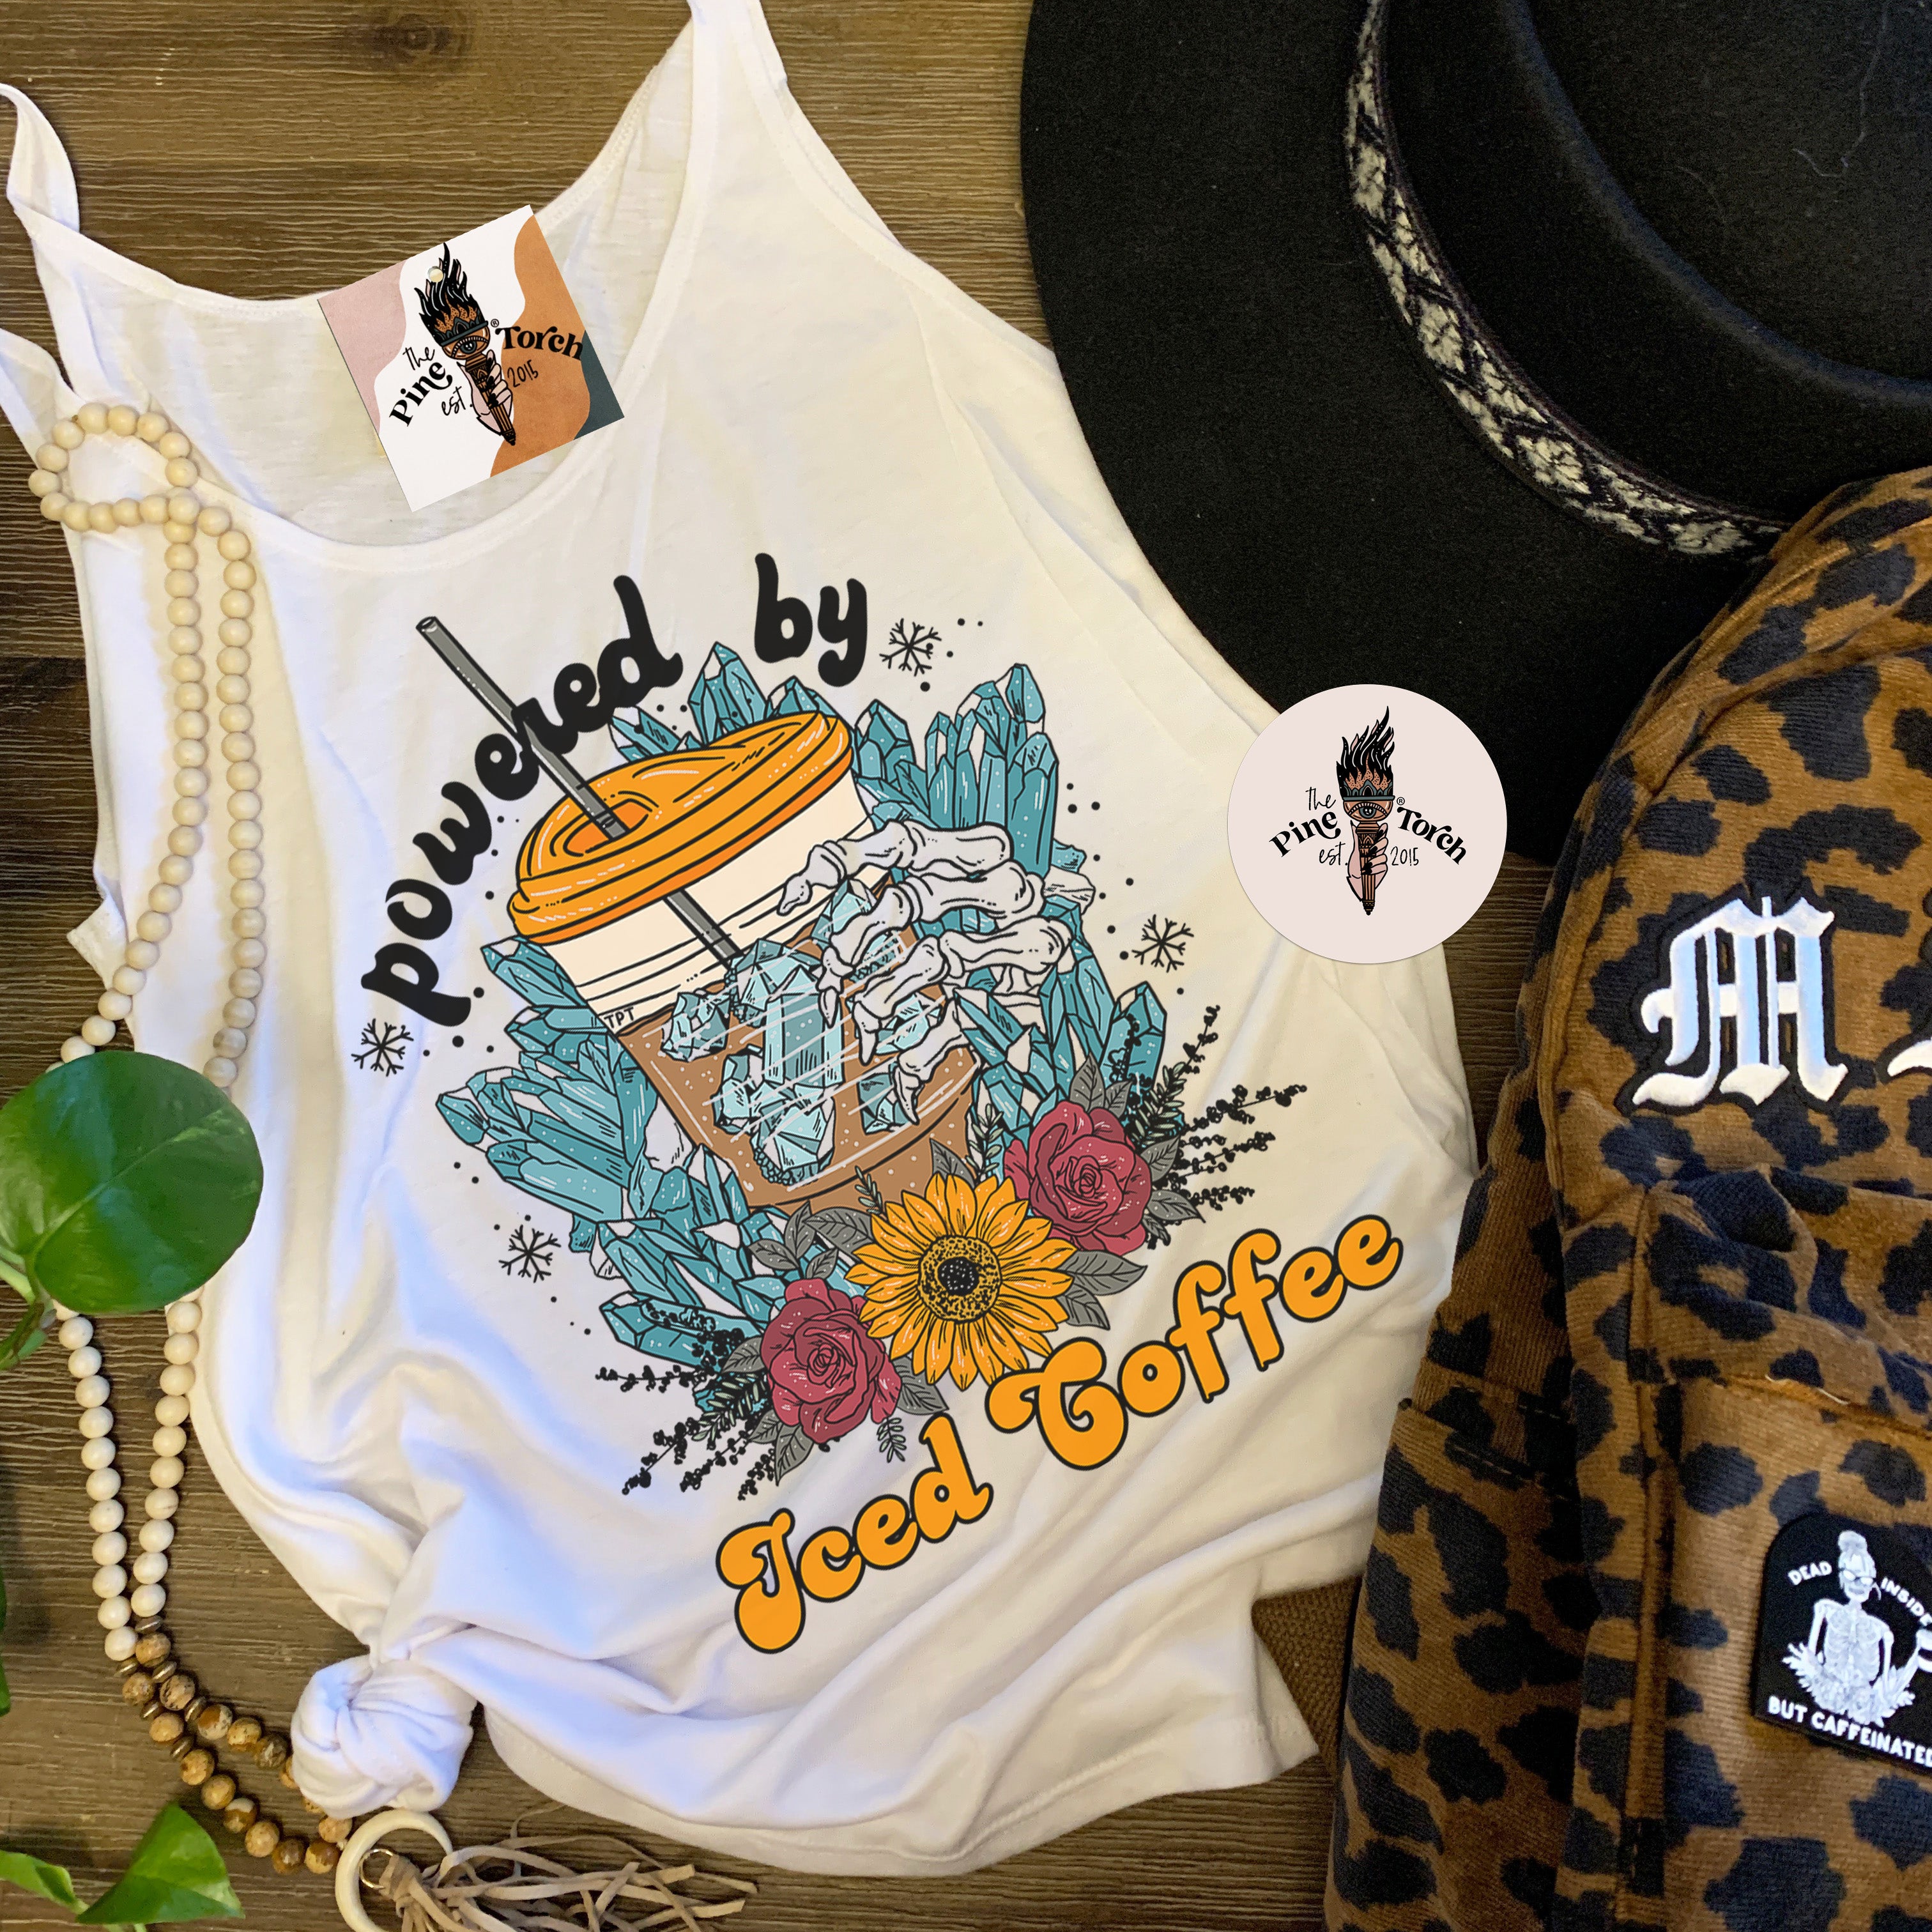 « POWERED BY ICED COFFEE » SLOUCHY or RACERBACK TANK